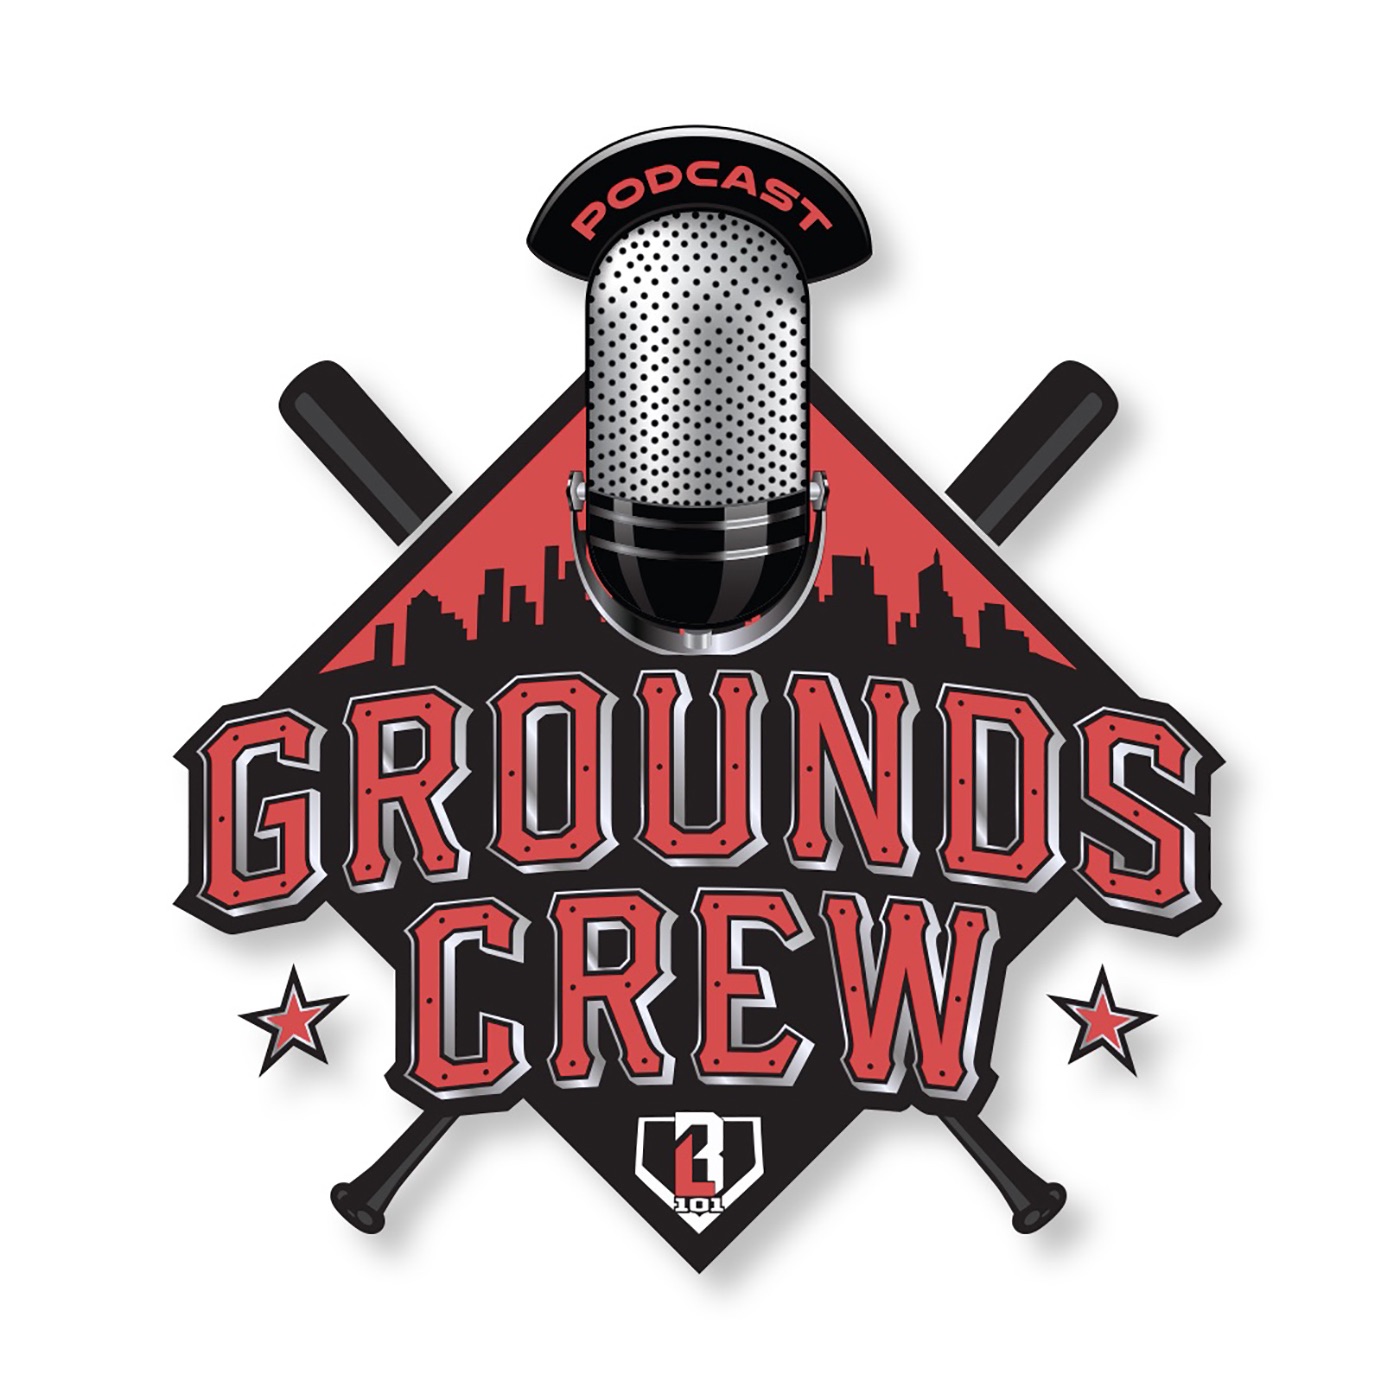 The Grounds Crew - A Baseball Podcast